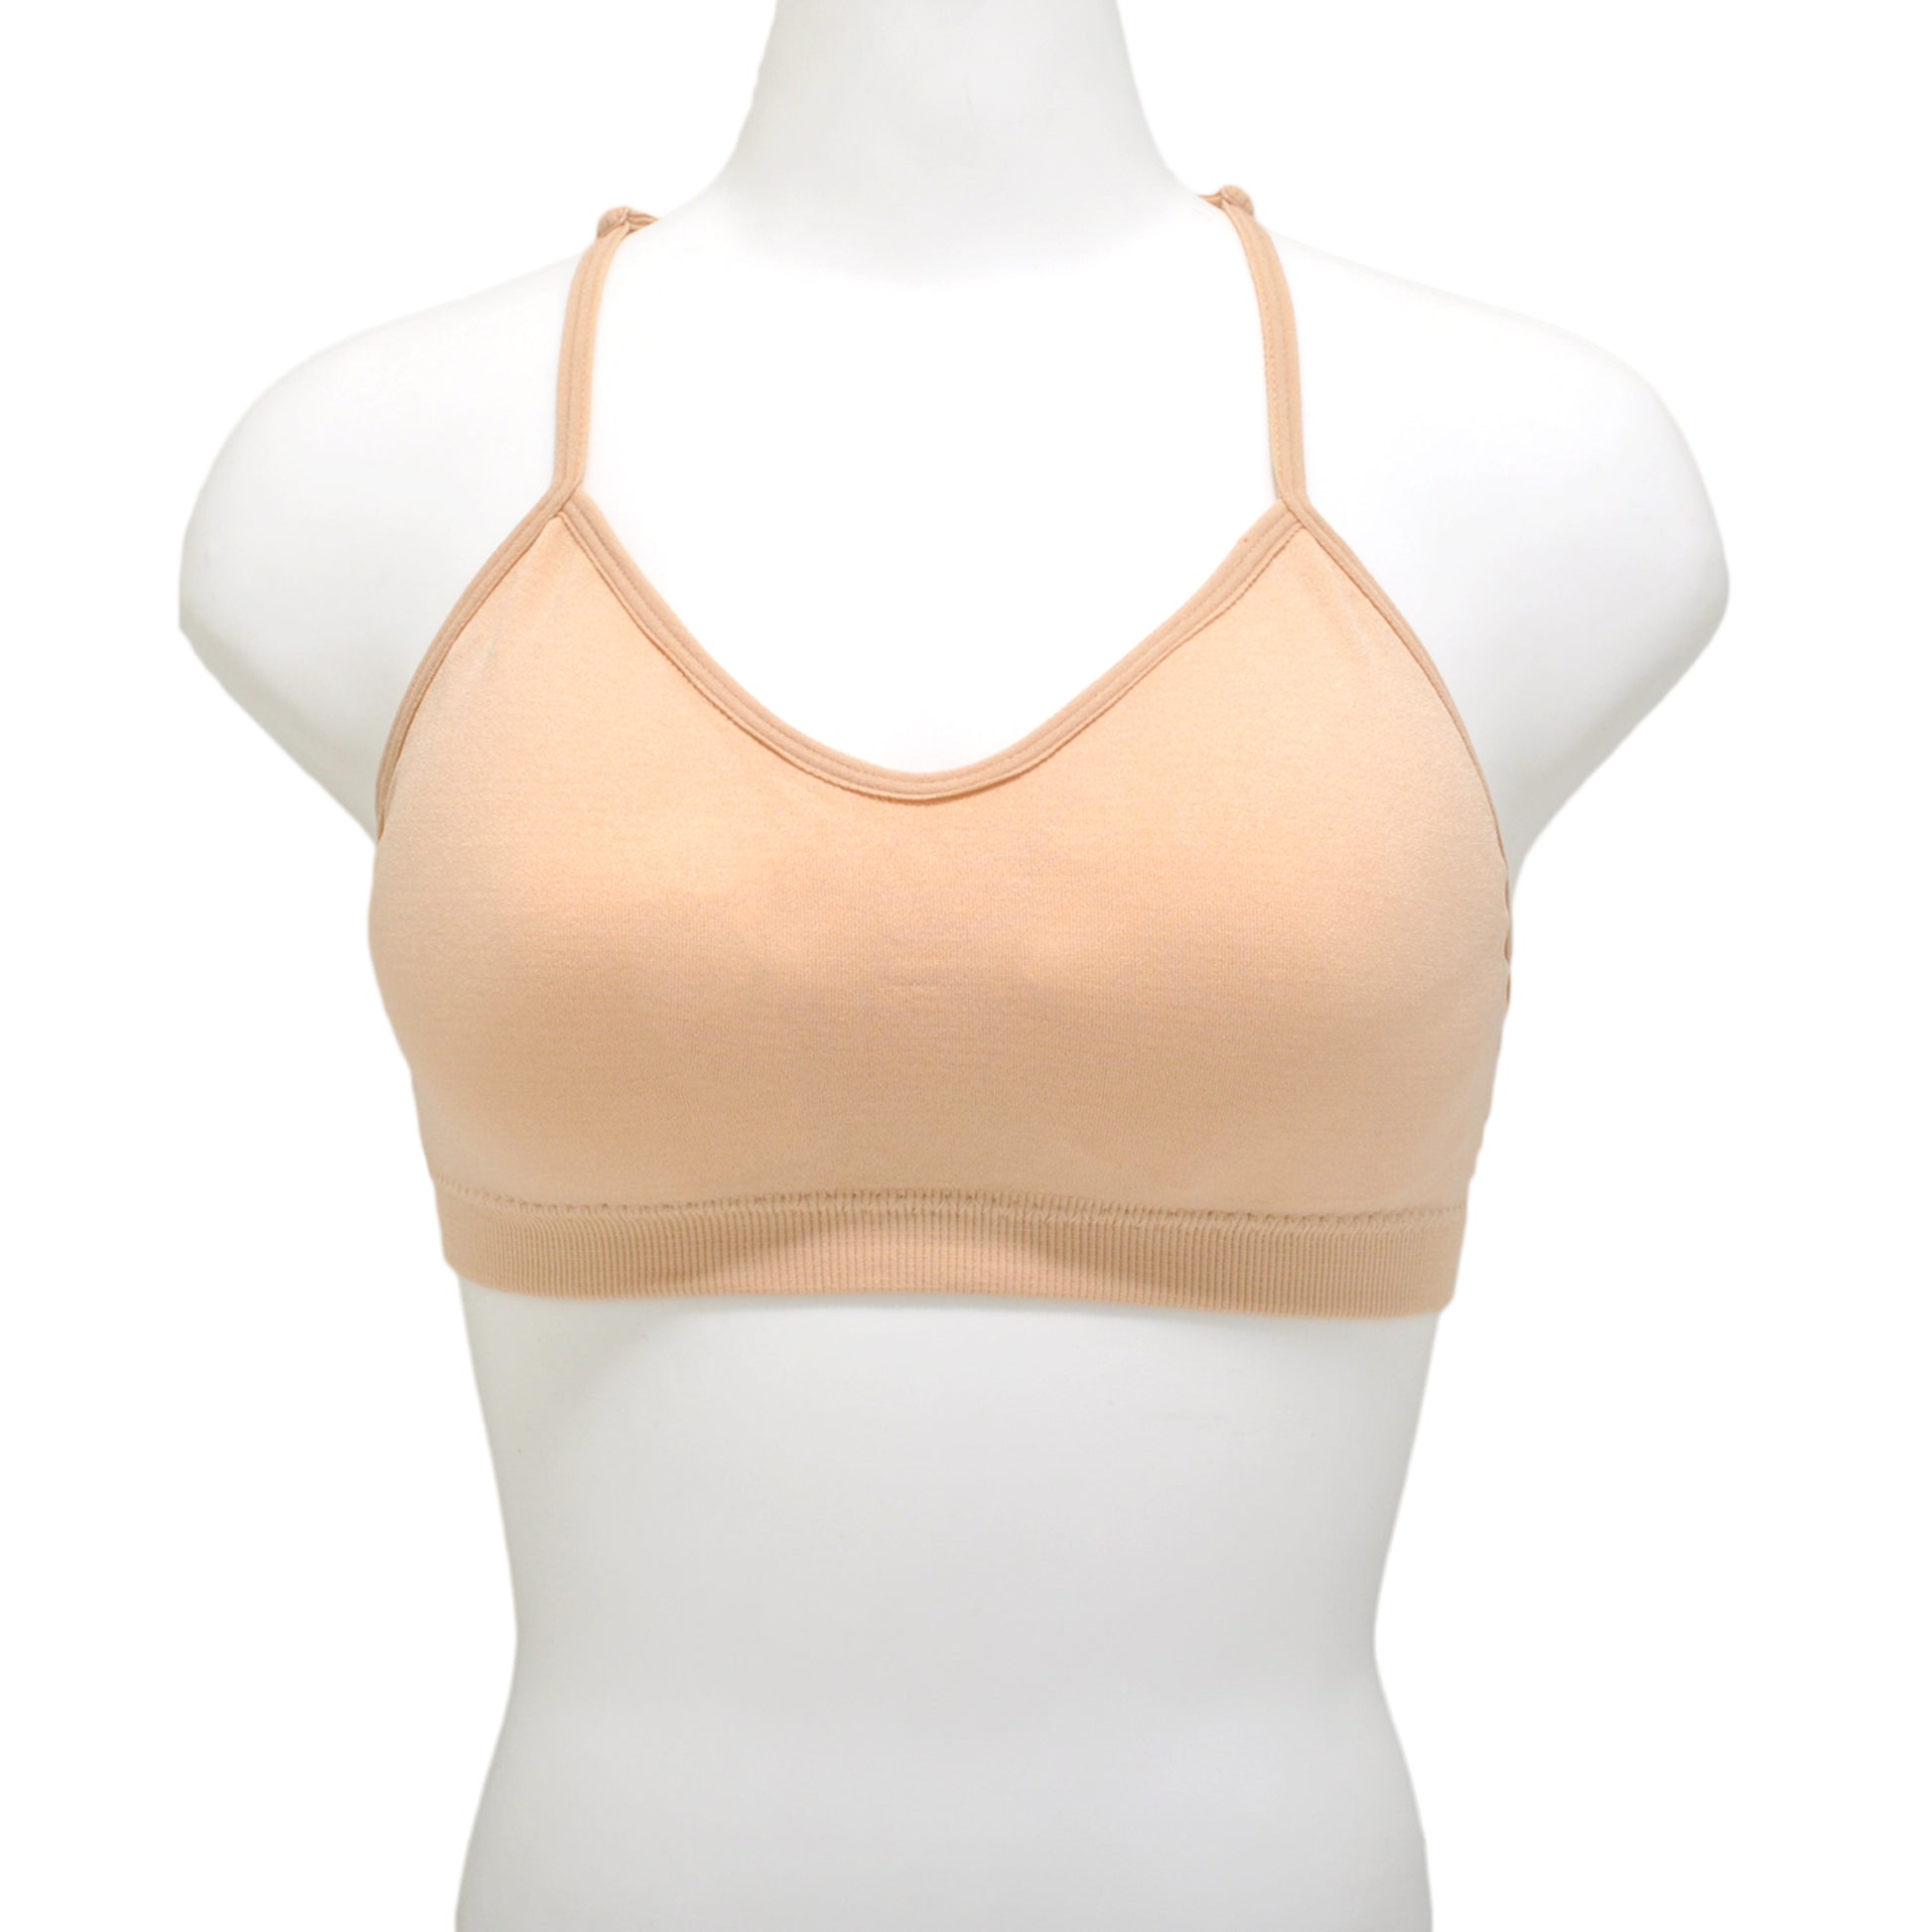 Angelina Wired Front Closure Bras with Lace Racerback (6-Pack)